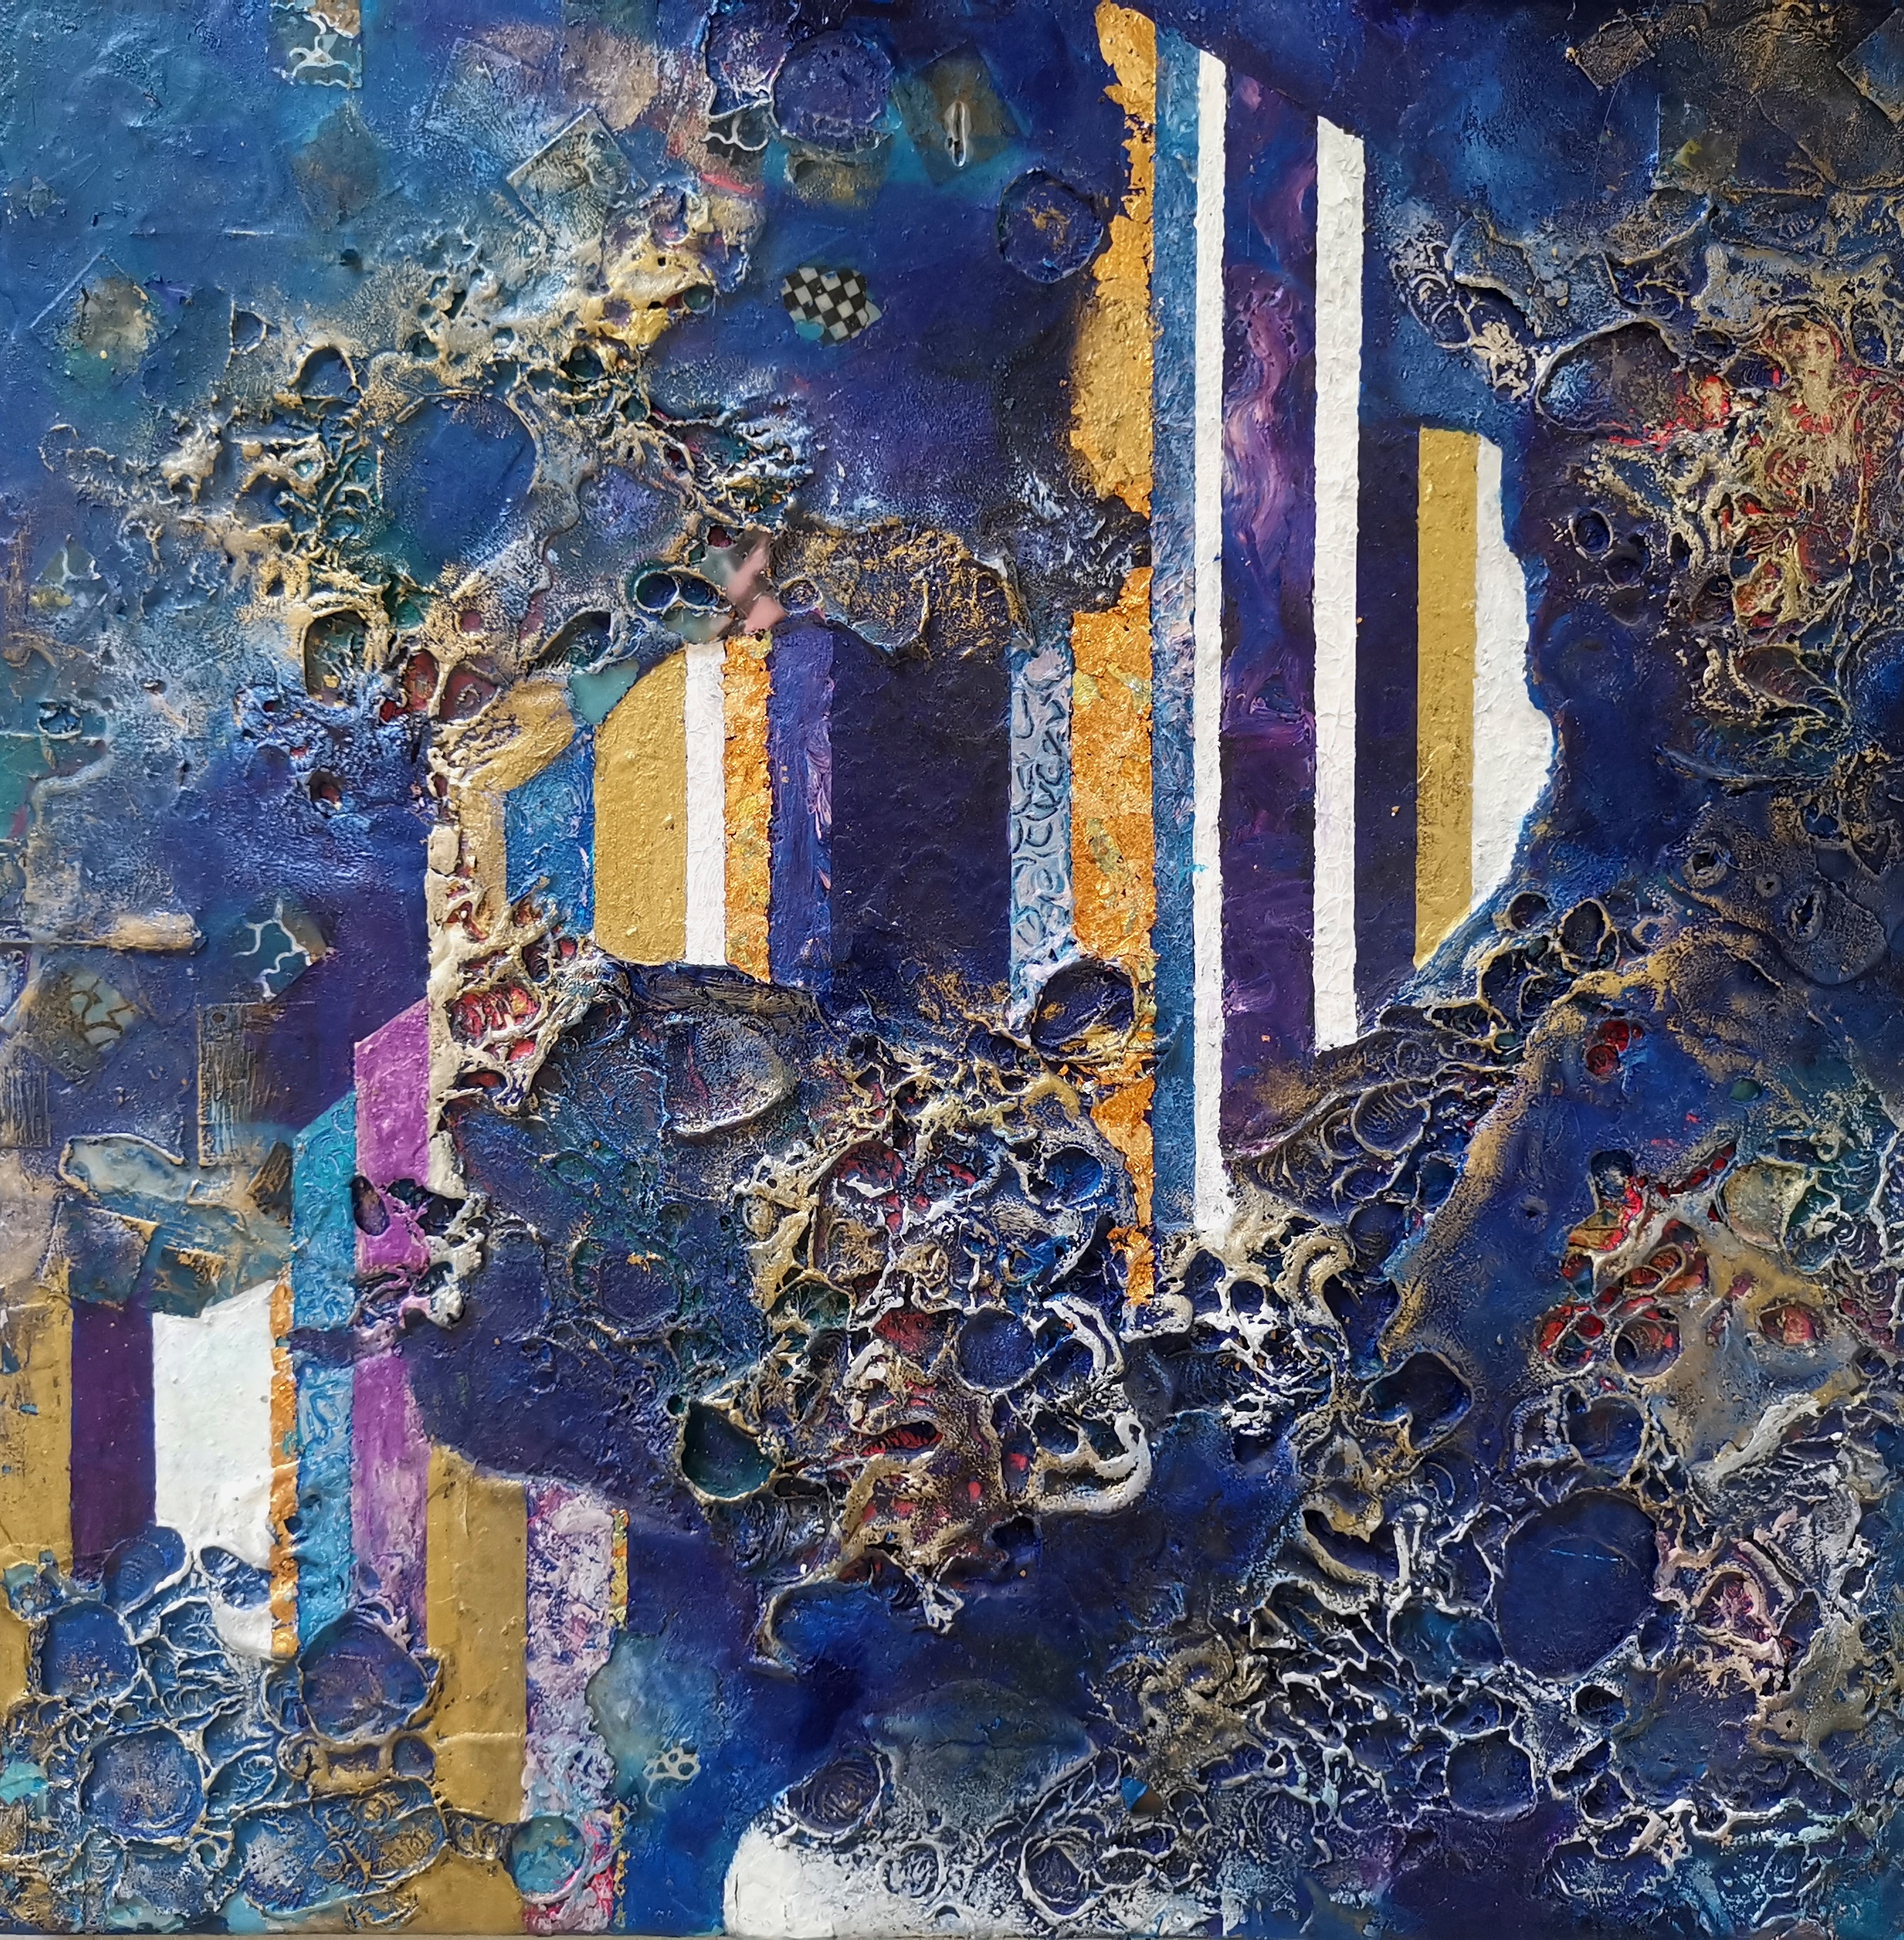 Lynda Stevens; City Mirage, 2014, Original Mixed Media, 40 x 40 cm. Artwork description: 241 Mixed- media composition, juxtaposing an inchoate textured surface against the rigidity of straight columns.  Melted candle wax was used for the textures, acrylic, gouache and enamel paint for the columns, with a little metal foil.  This work explores the tension between artifice and form, and chaos. ...